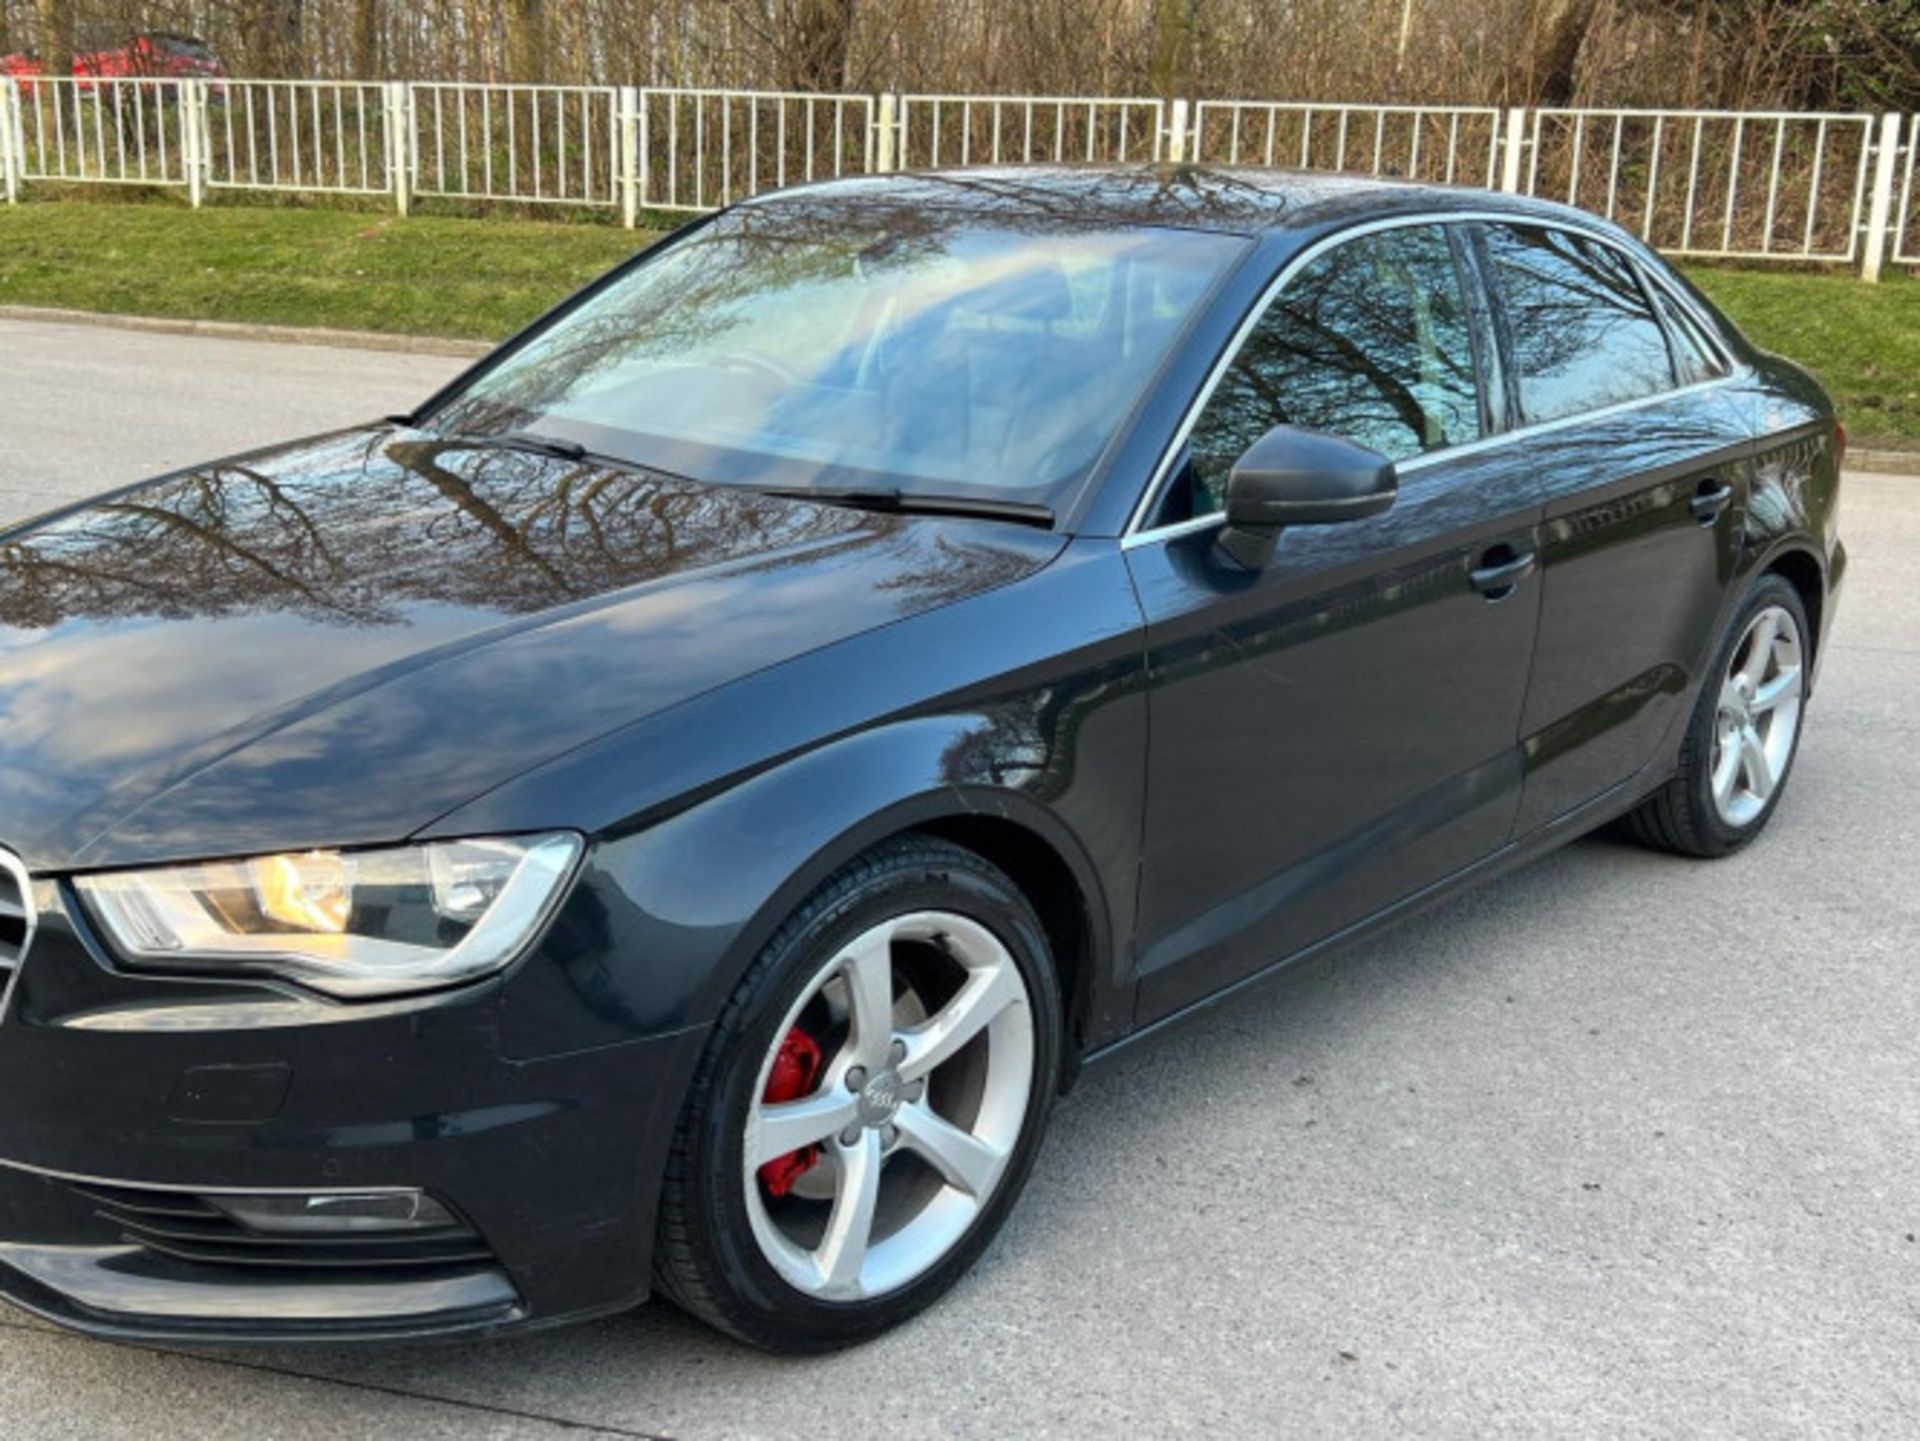 AUDI A3 2.0TDI SPORTBACK - STYLE, PERFORMANCE, AND COMFORT COMBINED >>--NO VAT ON HAMMER--<< - Image 190 of 216